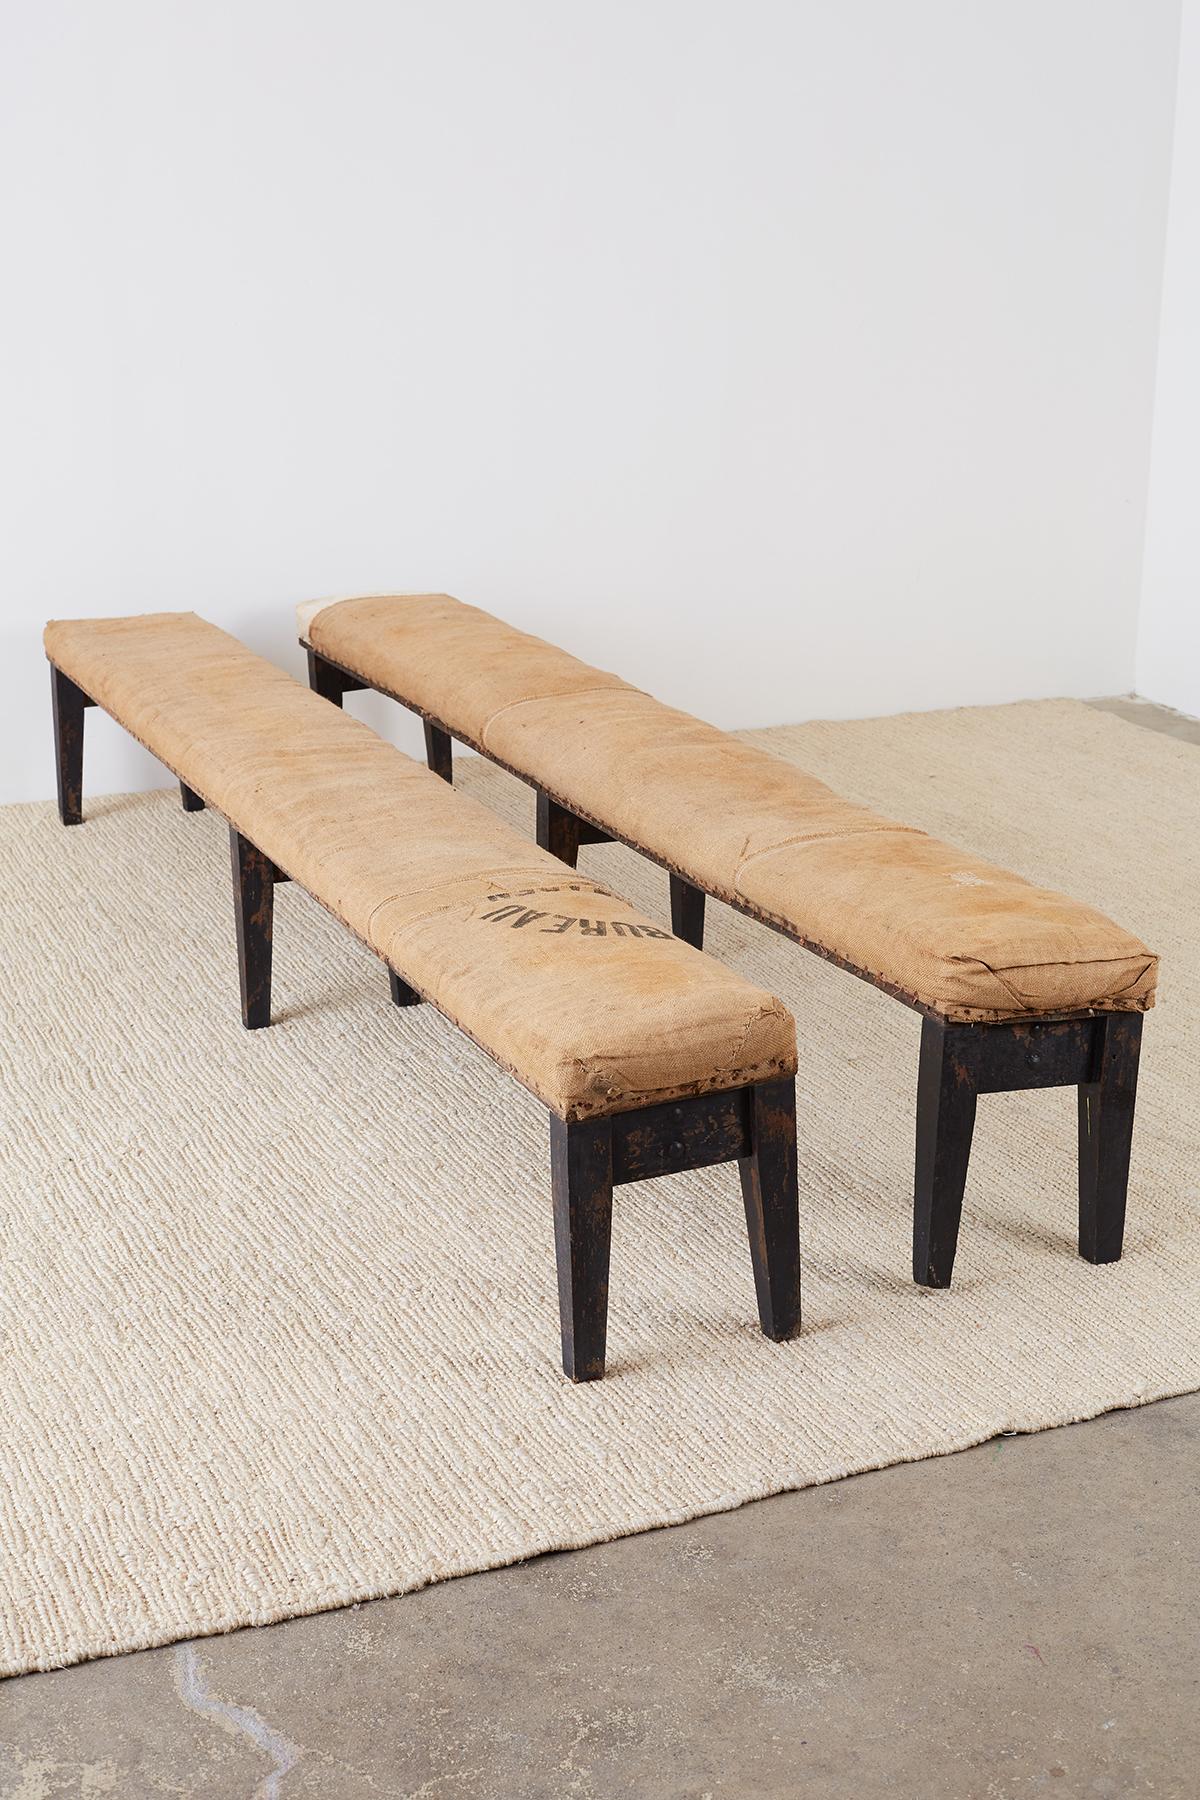 Sensational pair of long rustic French farmhouse benches from the early 20th century. Beautiful distressed patina upholstered in an antique burlap fabric with nail head trim. Each bench is supported by six tapered wood legs with iron straps. One